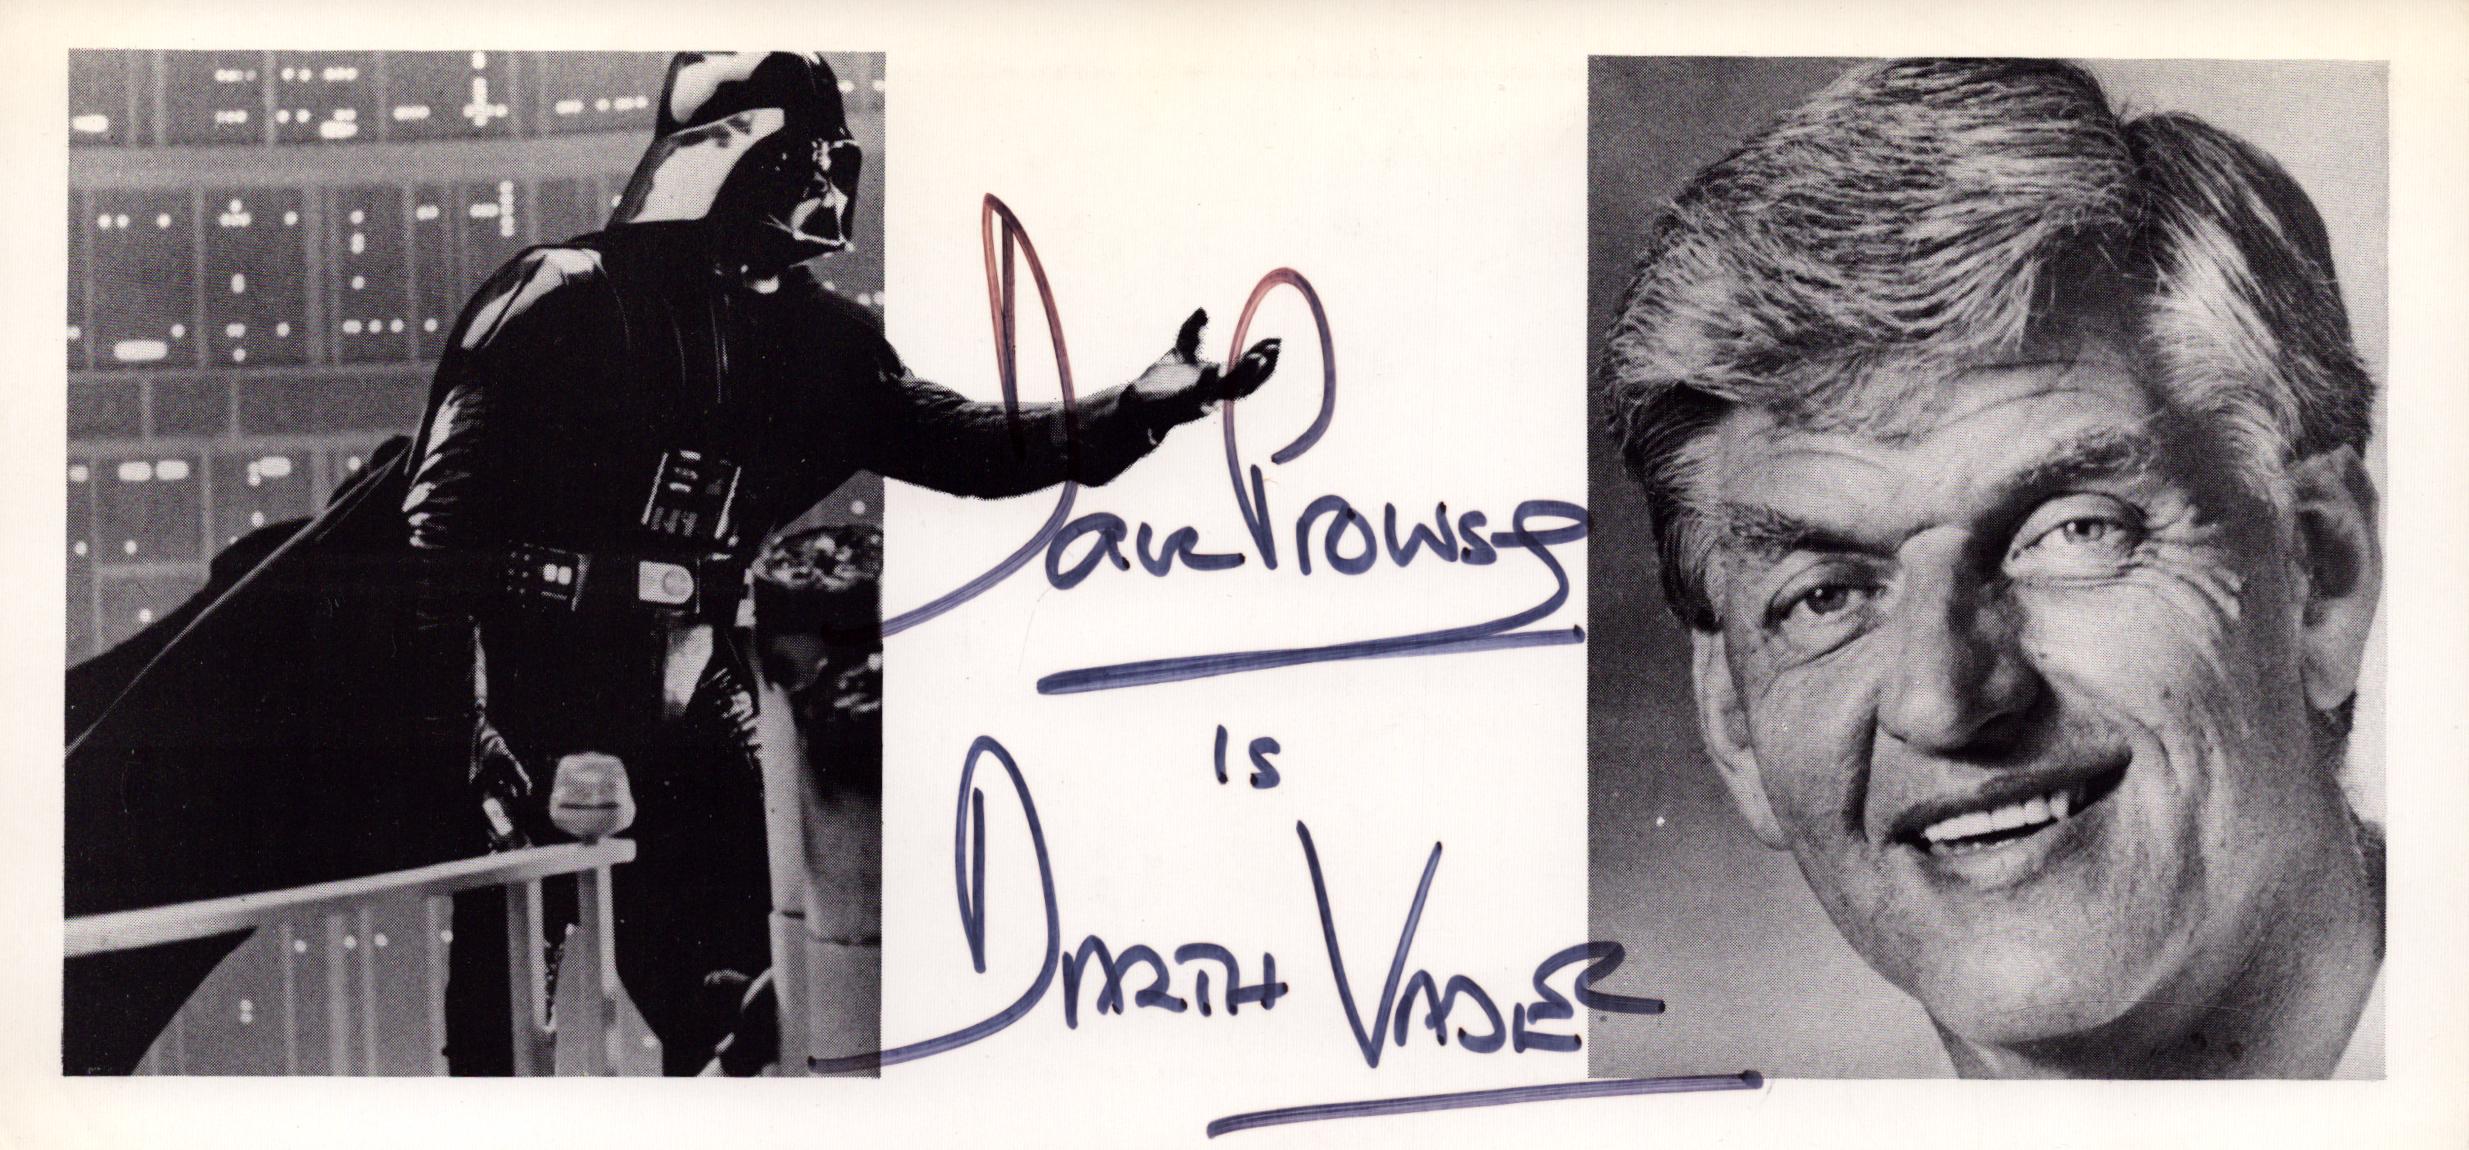 David Prowse signed Darth Vader black and white promo card 8x4 inch in size. Good Condition. All